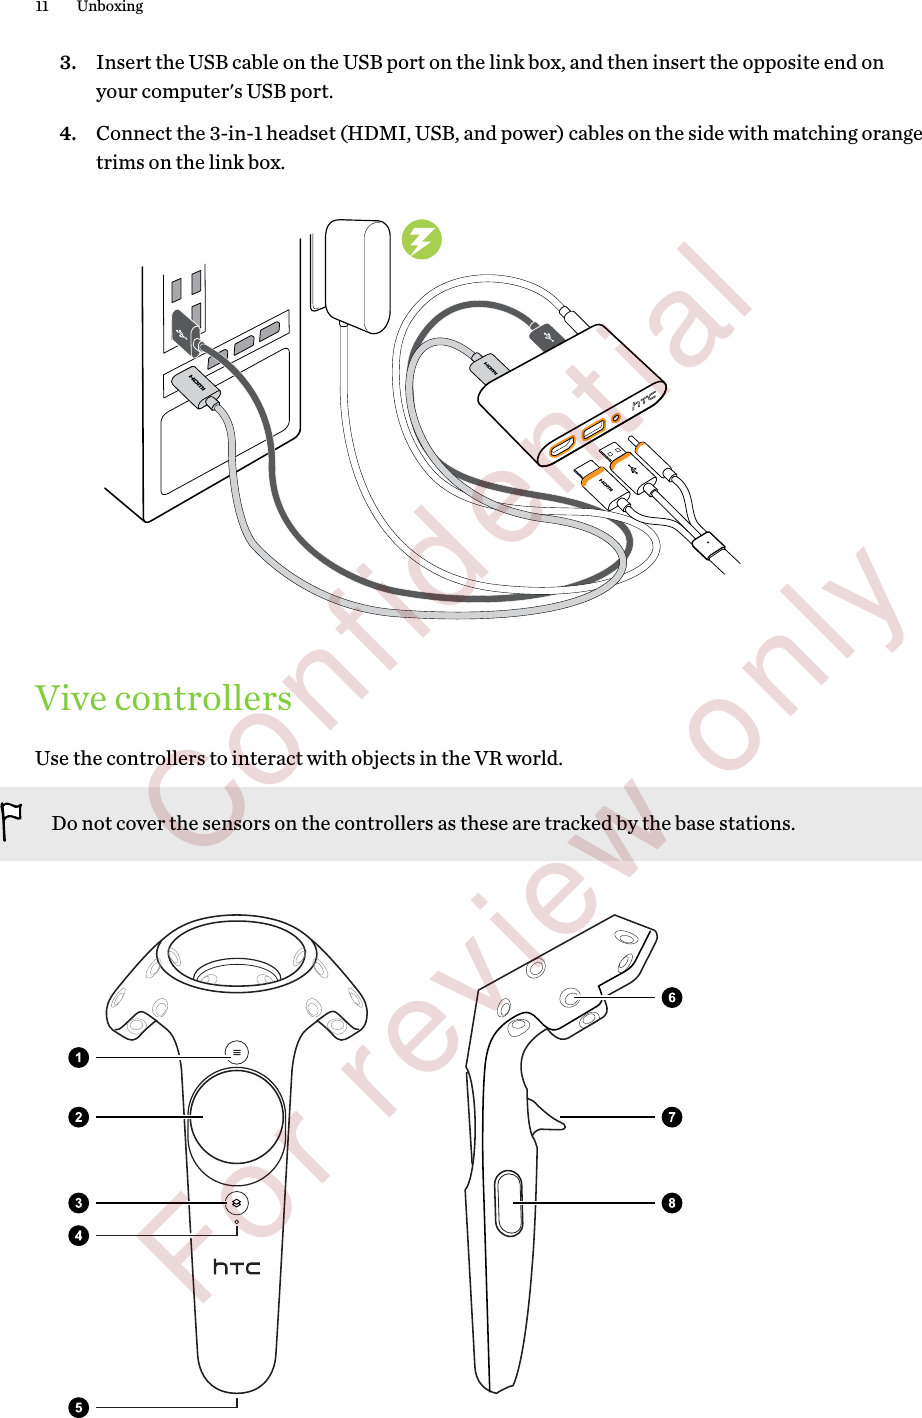 3. Insert the USB cable on the USB port on the link box, and then insert the opposite end onyour computer&apos;s USB port.4. Connect the 3-in-1 headset (HDMI, USB, and power) cables on the side with matching orangetrims on the link box.Vive controllersUse the controllers to interact with objects in the VR world.Do not cover the sensors on the controllers as these are tracked by the base stations.11 Unboxing        Confidential  For review only